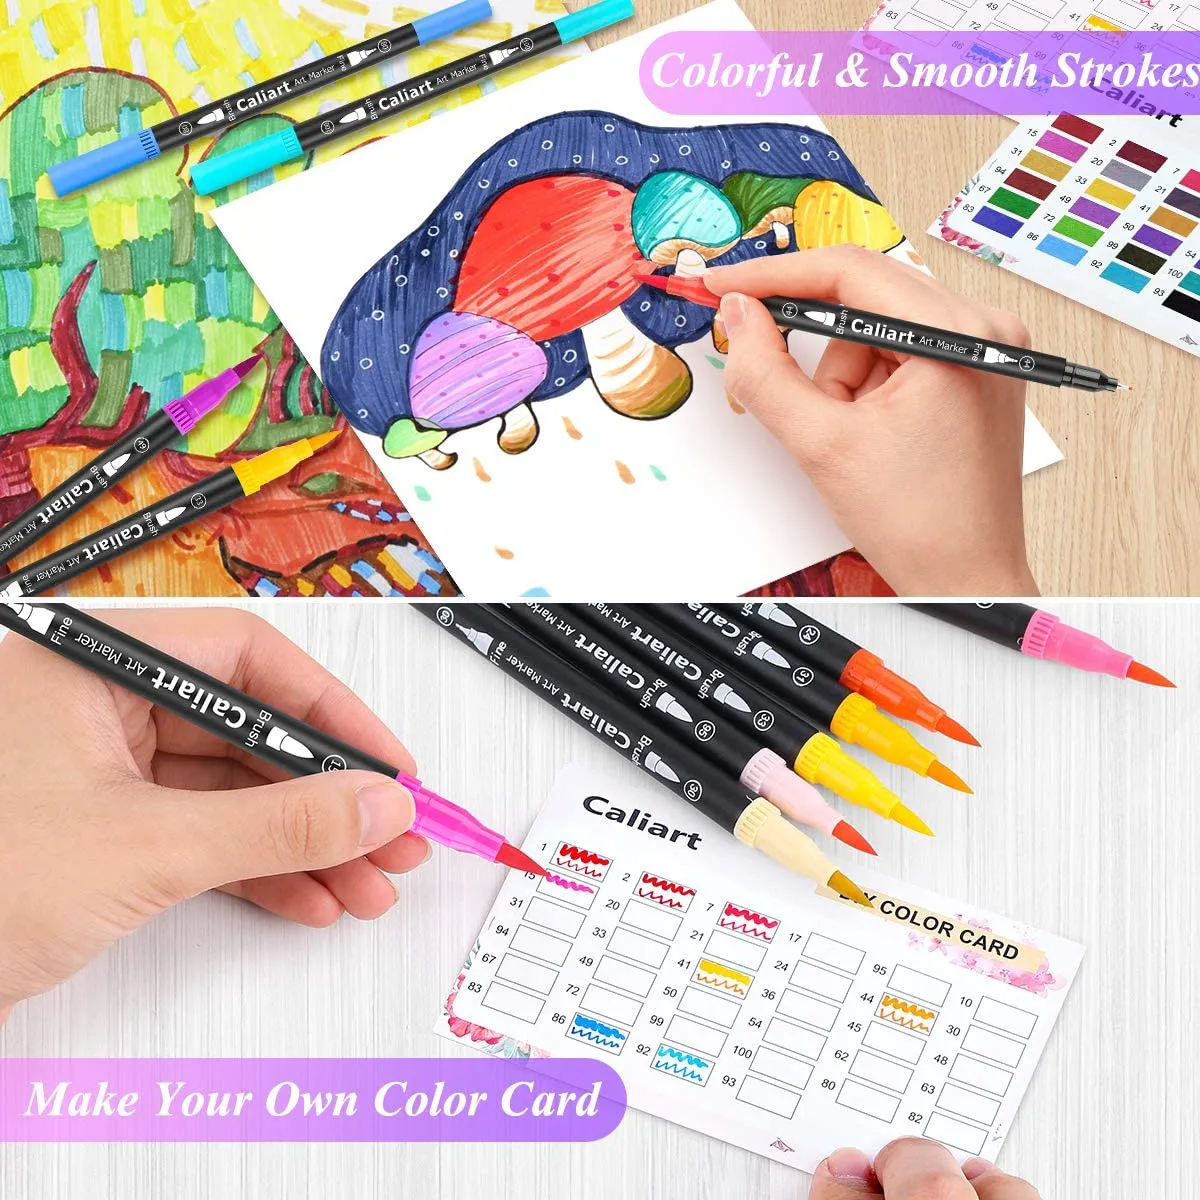 Wholesale Caliart 34 Dua Art Markers, Artist Fine Brush Tip Pen For Kids  Adult Coloring Book Bullet Journaling Note Taking Lettering Calligraphy  Drawing Pens Craft Supplies From Ulovehome, $12.07